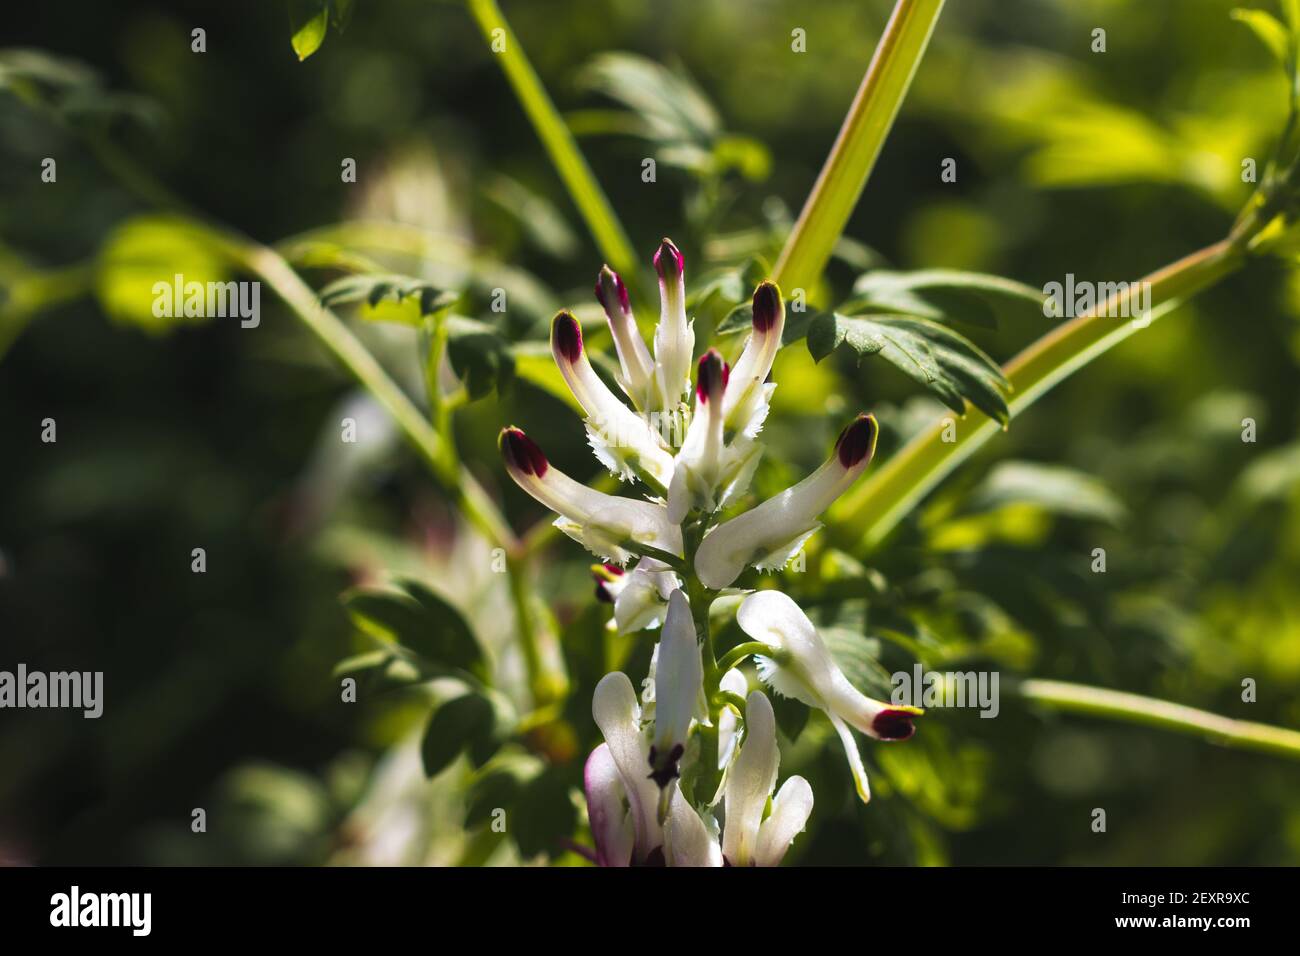 Close-up of Fumaria capreolata, the white ramping fumitory, white and purple flower on a blurred dark green background Stock Photo